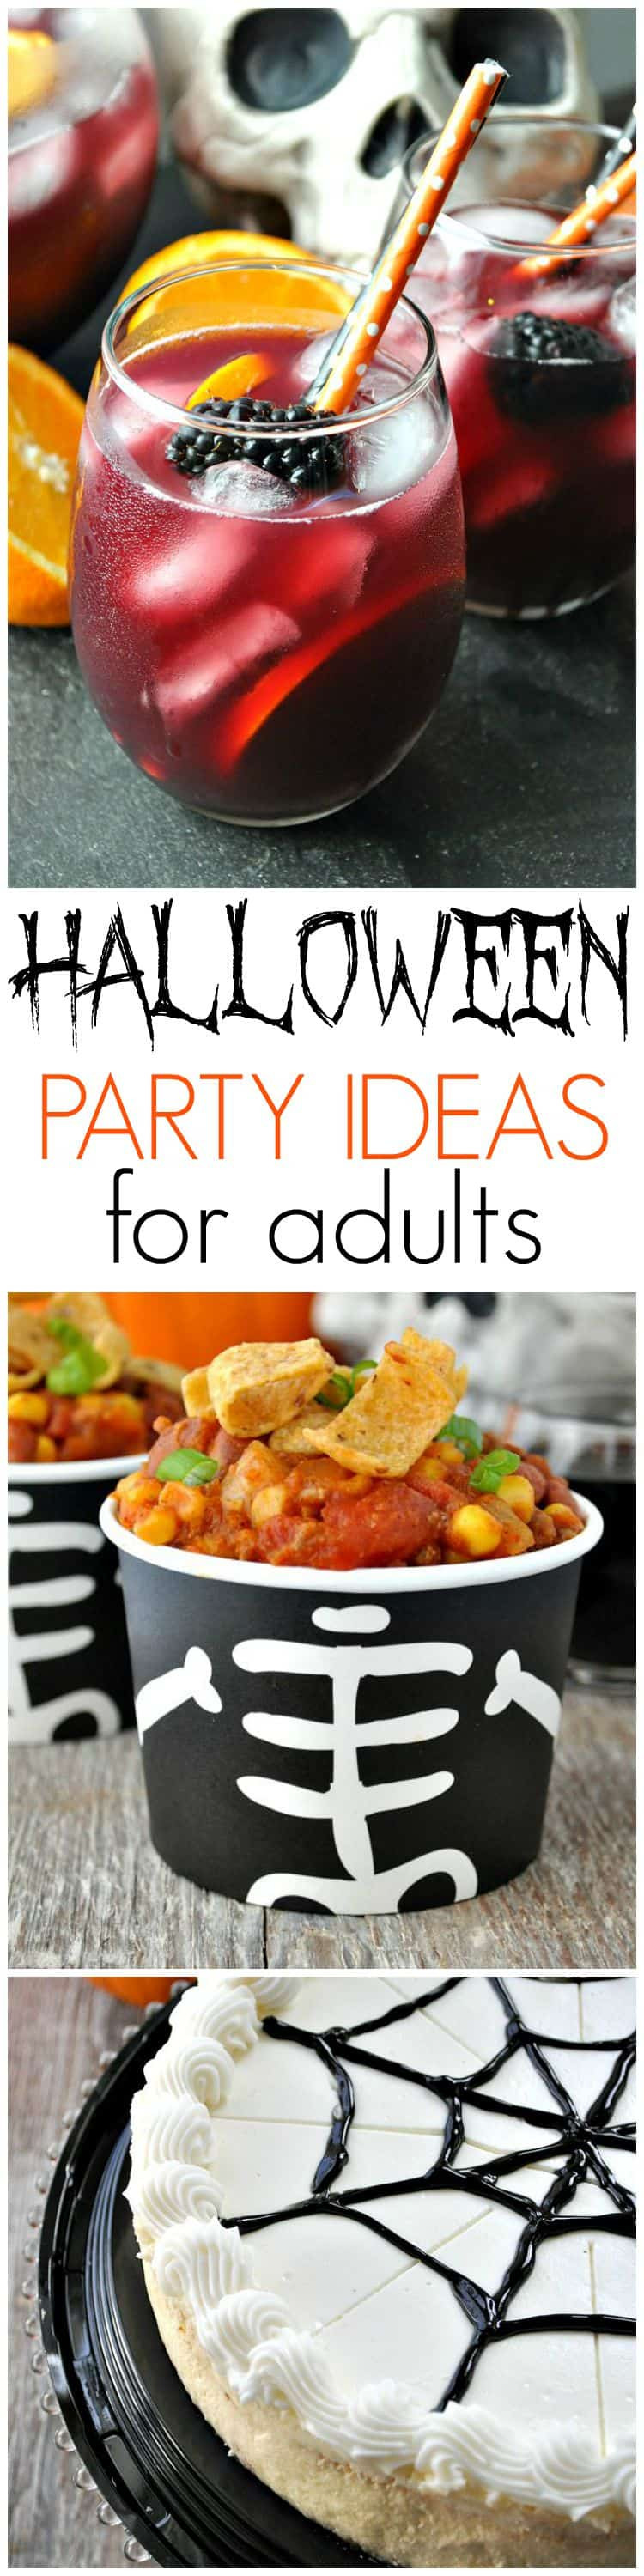 Halloween Party Ideas For Adults Content
 Slow Cooker Pumpkin Chili Halloween Party Ideas for